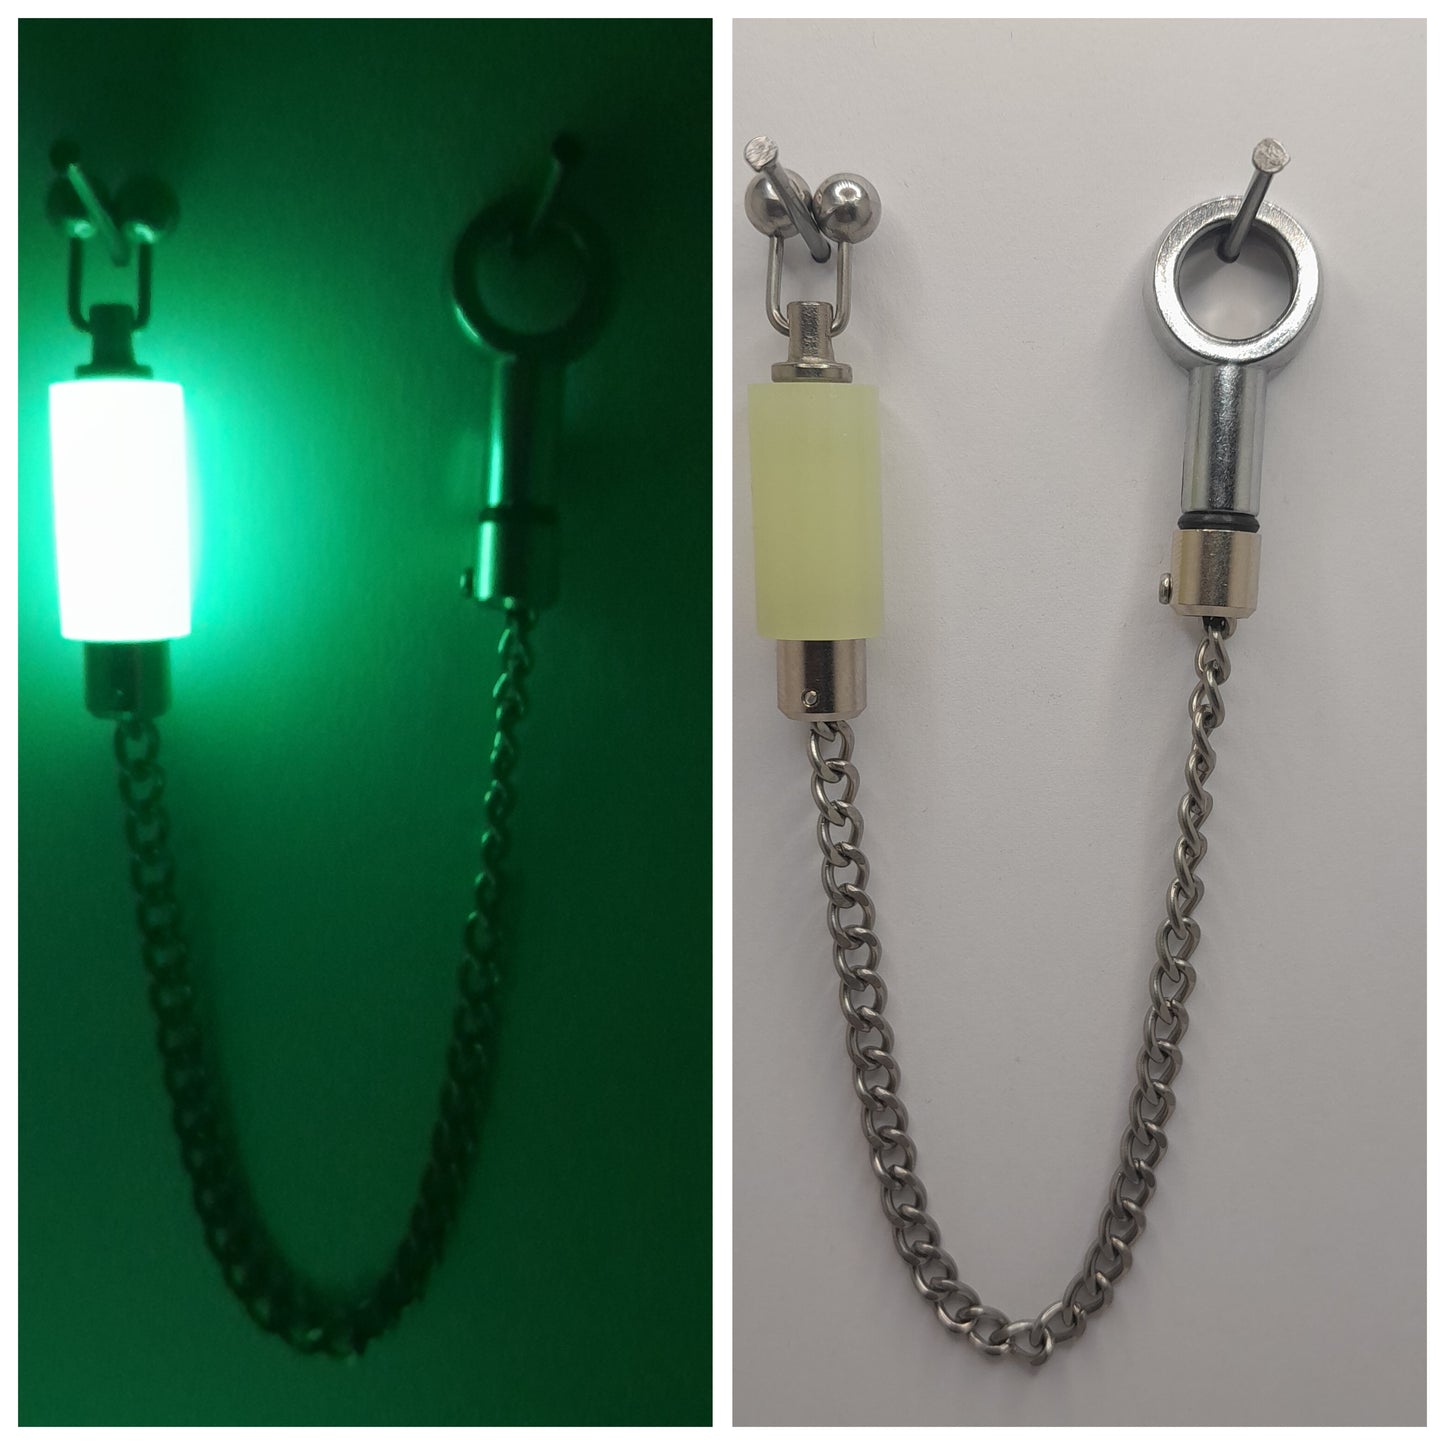 Slim Glow In The Dark Bobby's Bobbin With Black Or Stainless Chain Available In Three Lengths